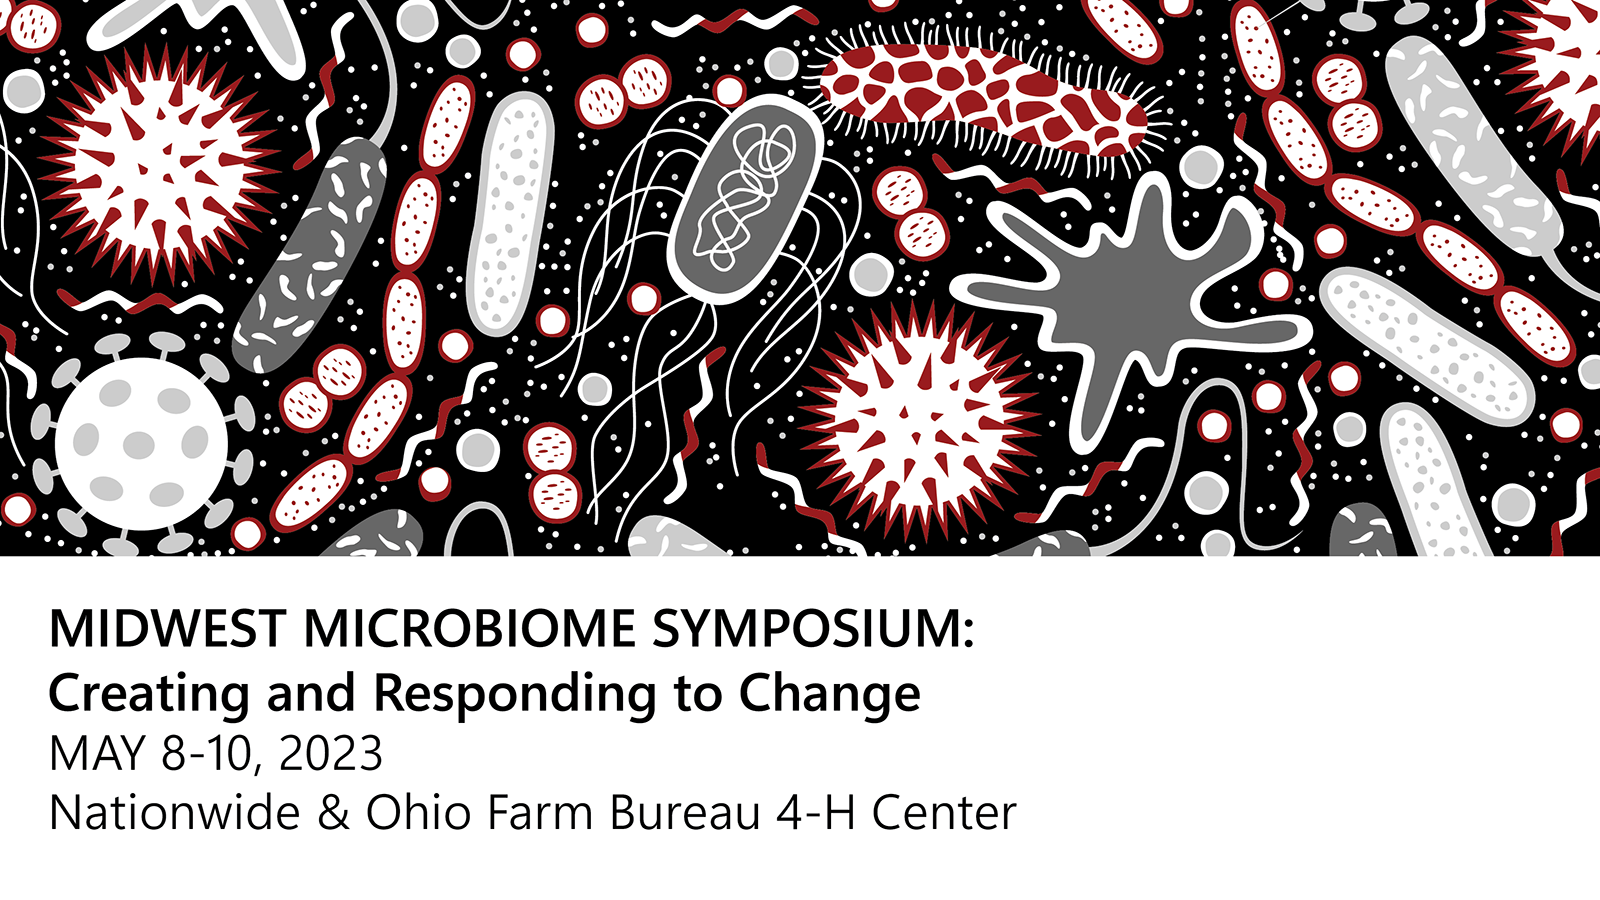 Midwest Microbiome Symposium: Creating and Responding to Change May 8-10, 2023 Nationwide and Farm Bureau 4H Center